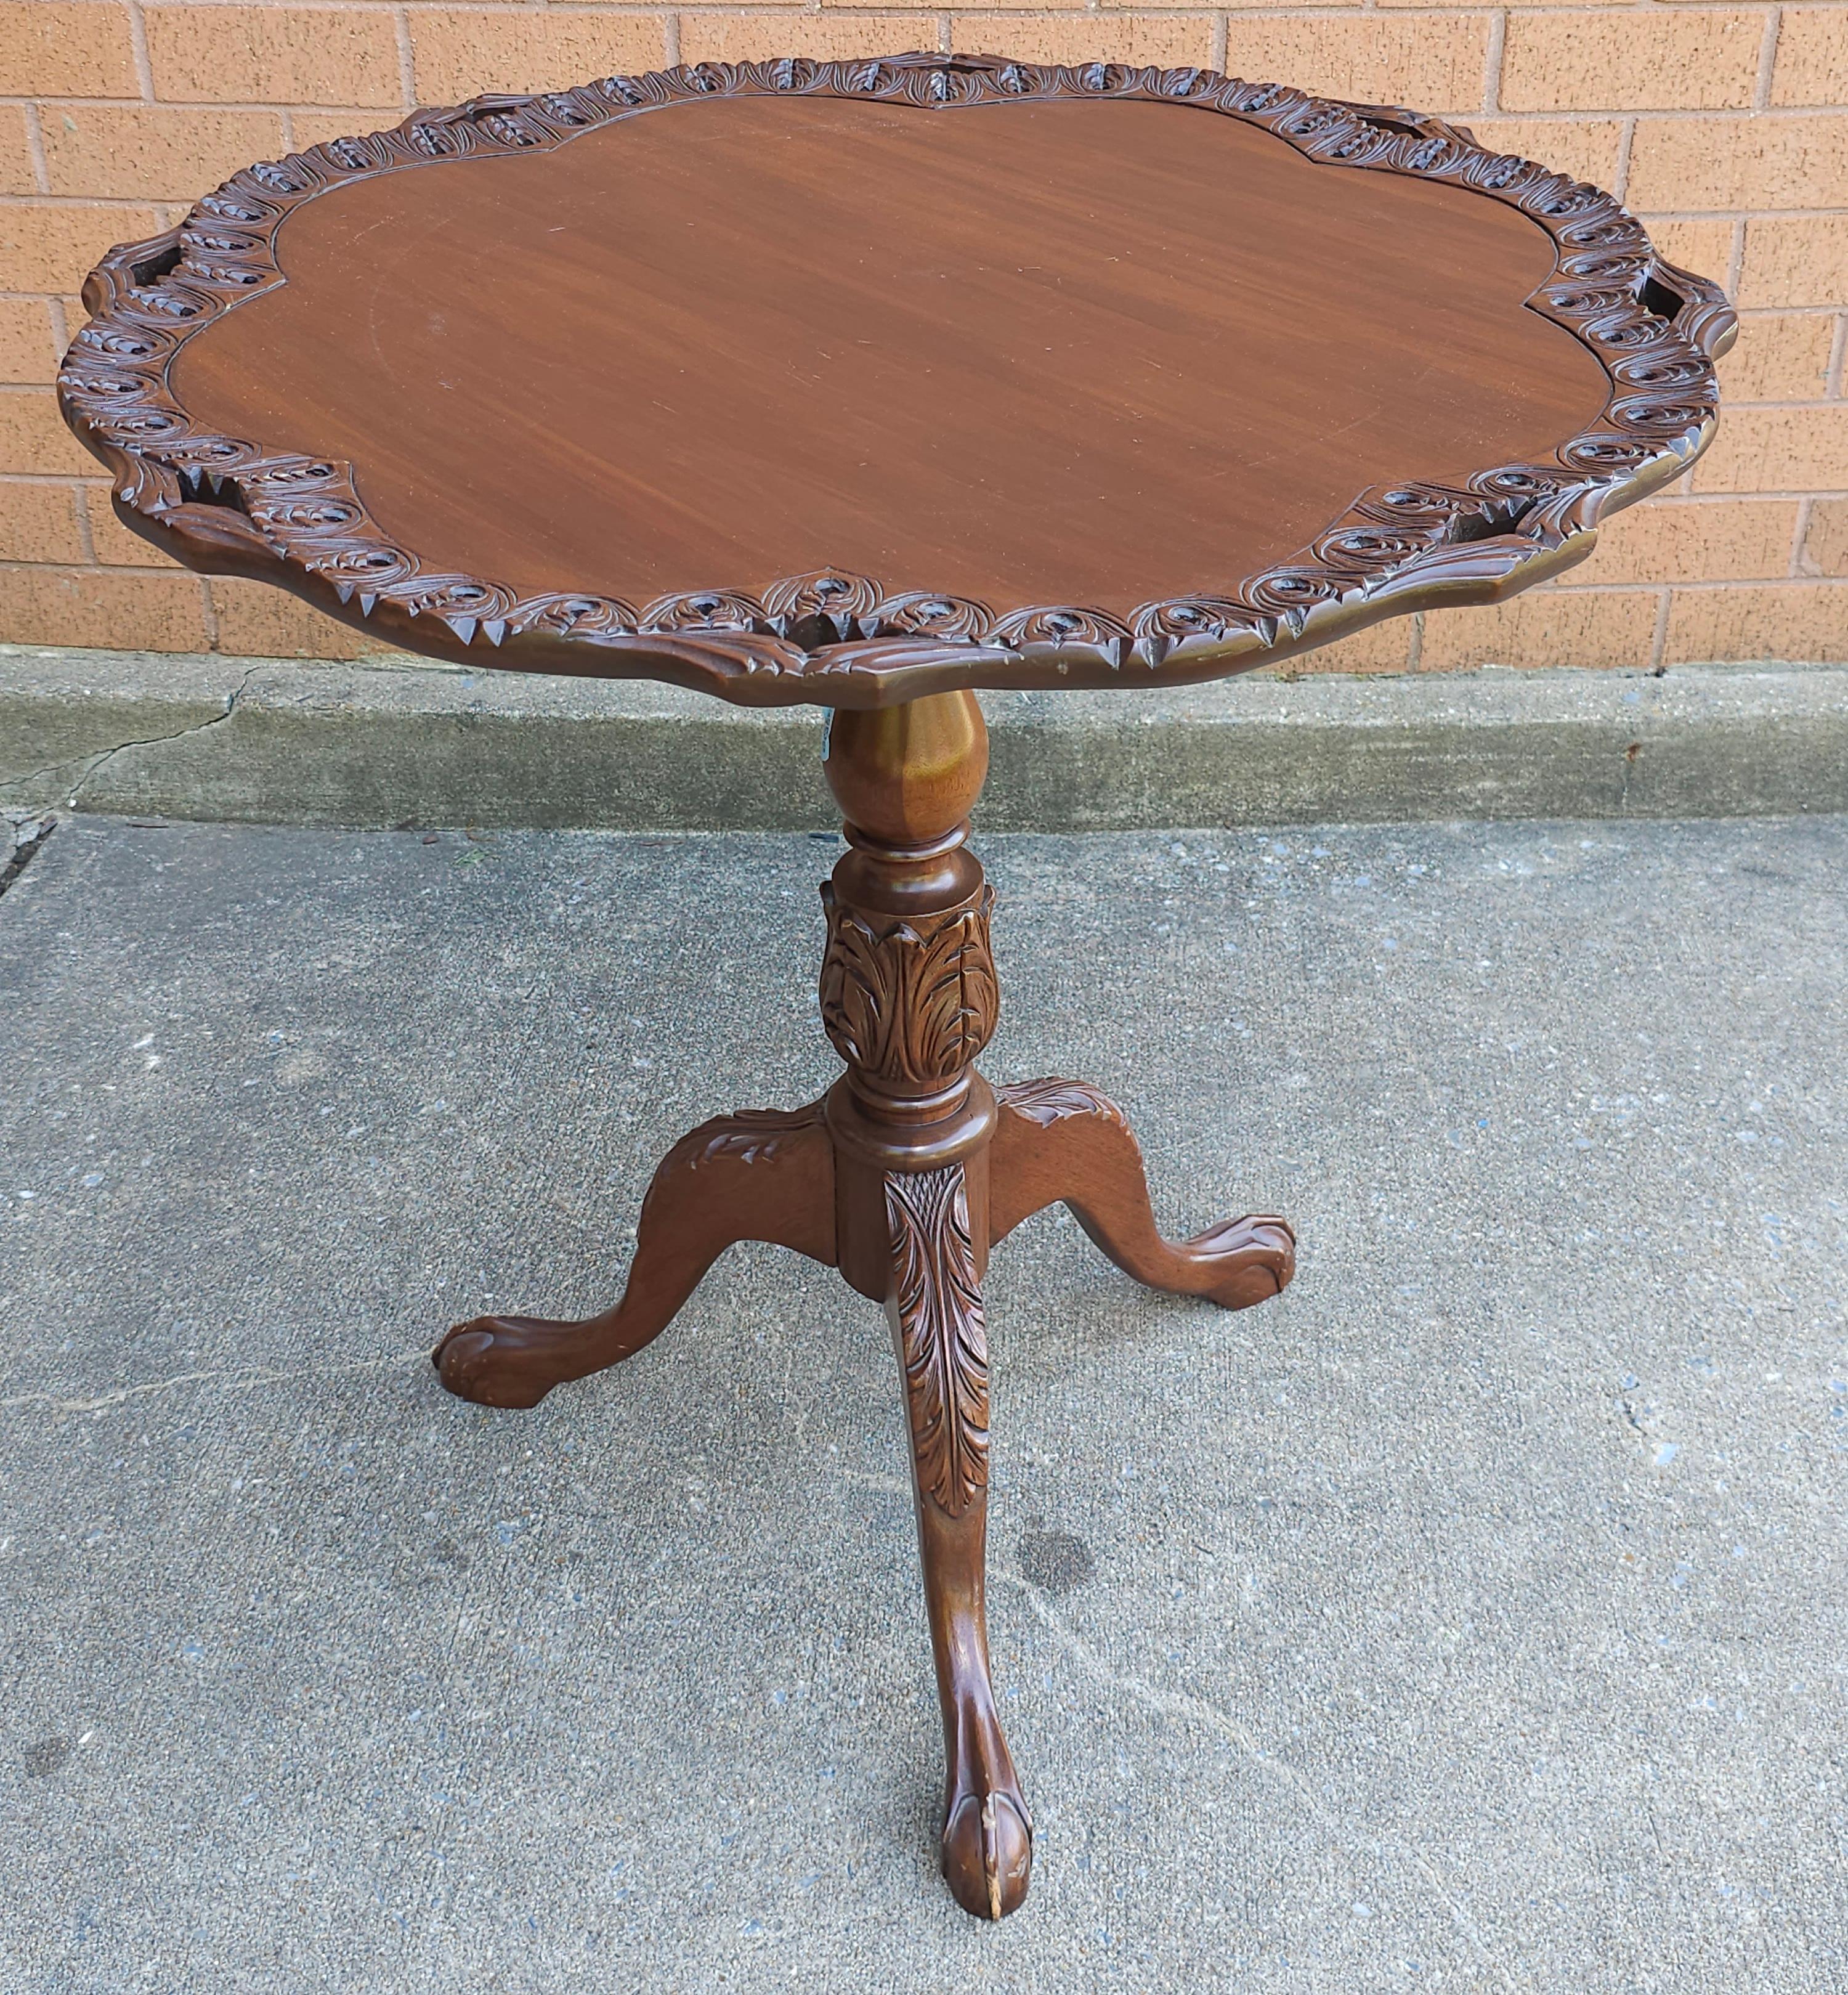 A Georgian Style Mahogany Carved hardwood Galleried Tilt Top Tea Table I'm great vintage condition. Measures 29.5